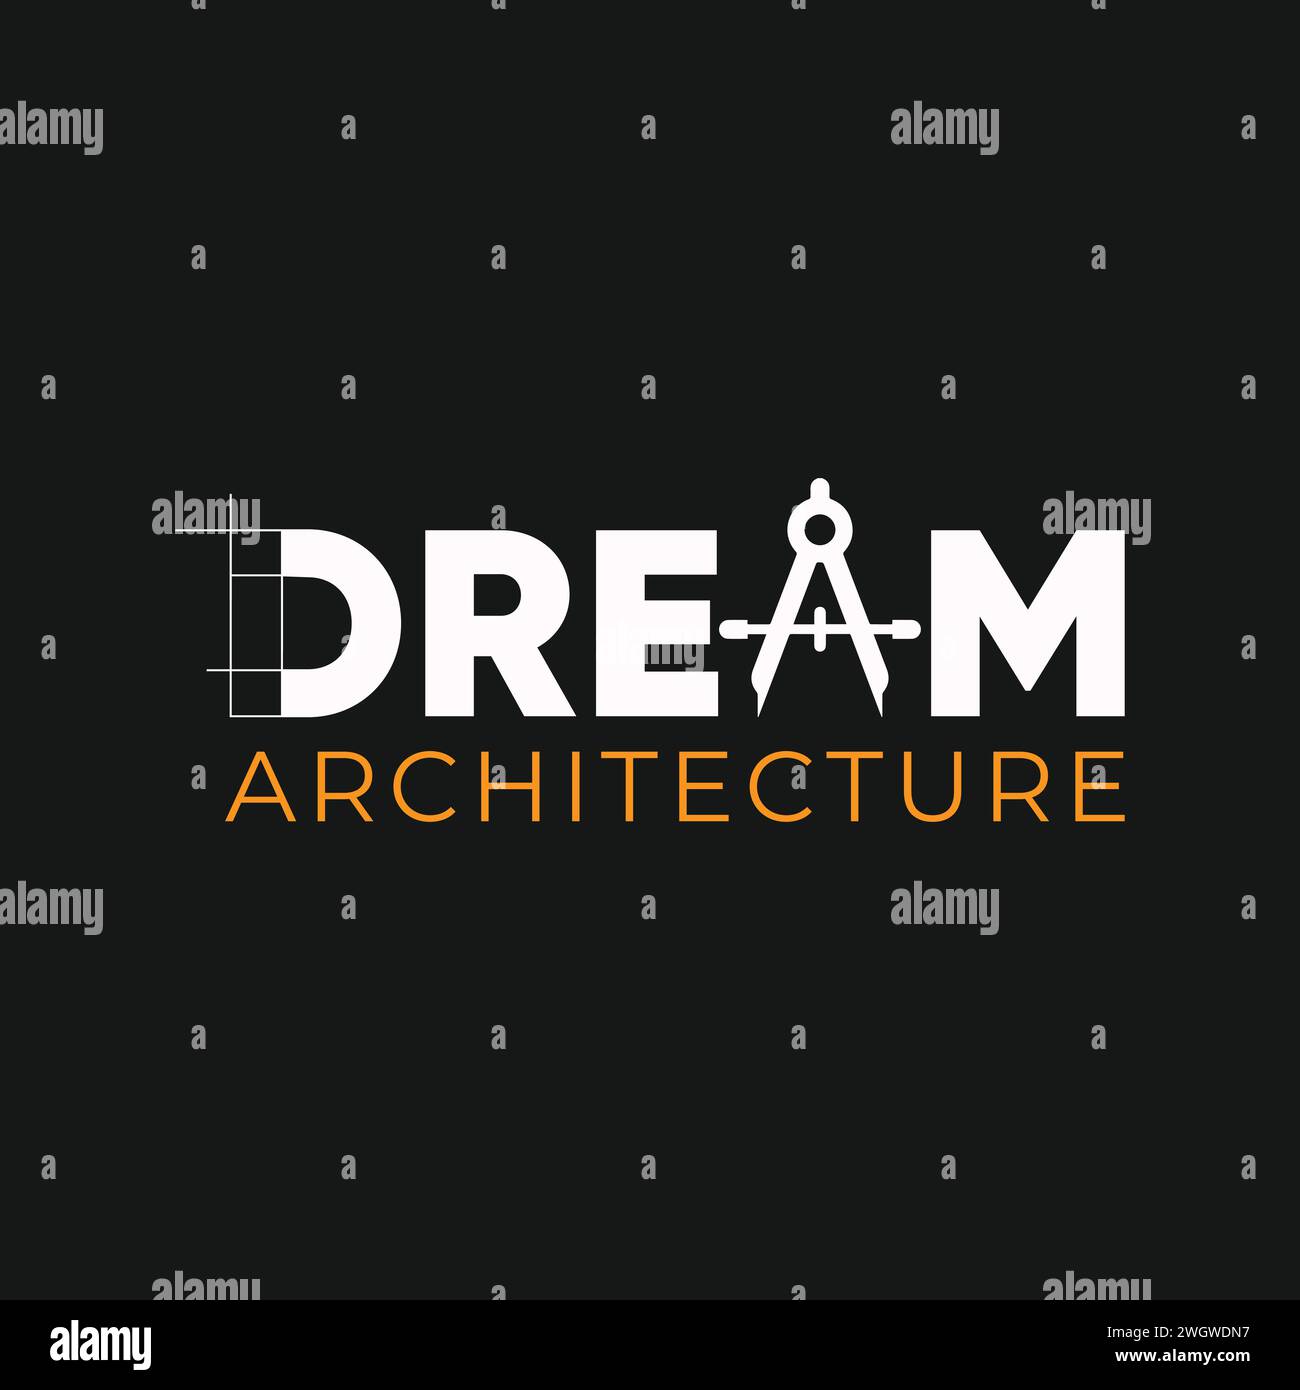 Dream architecture logo creative concept for construction building. Modern architect logo. Architecture element compass and sketch concept. Stock Vector